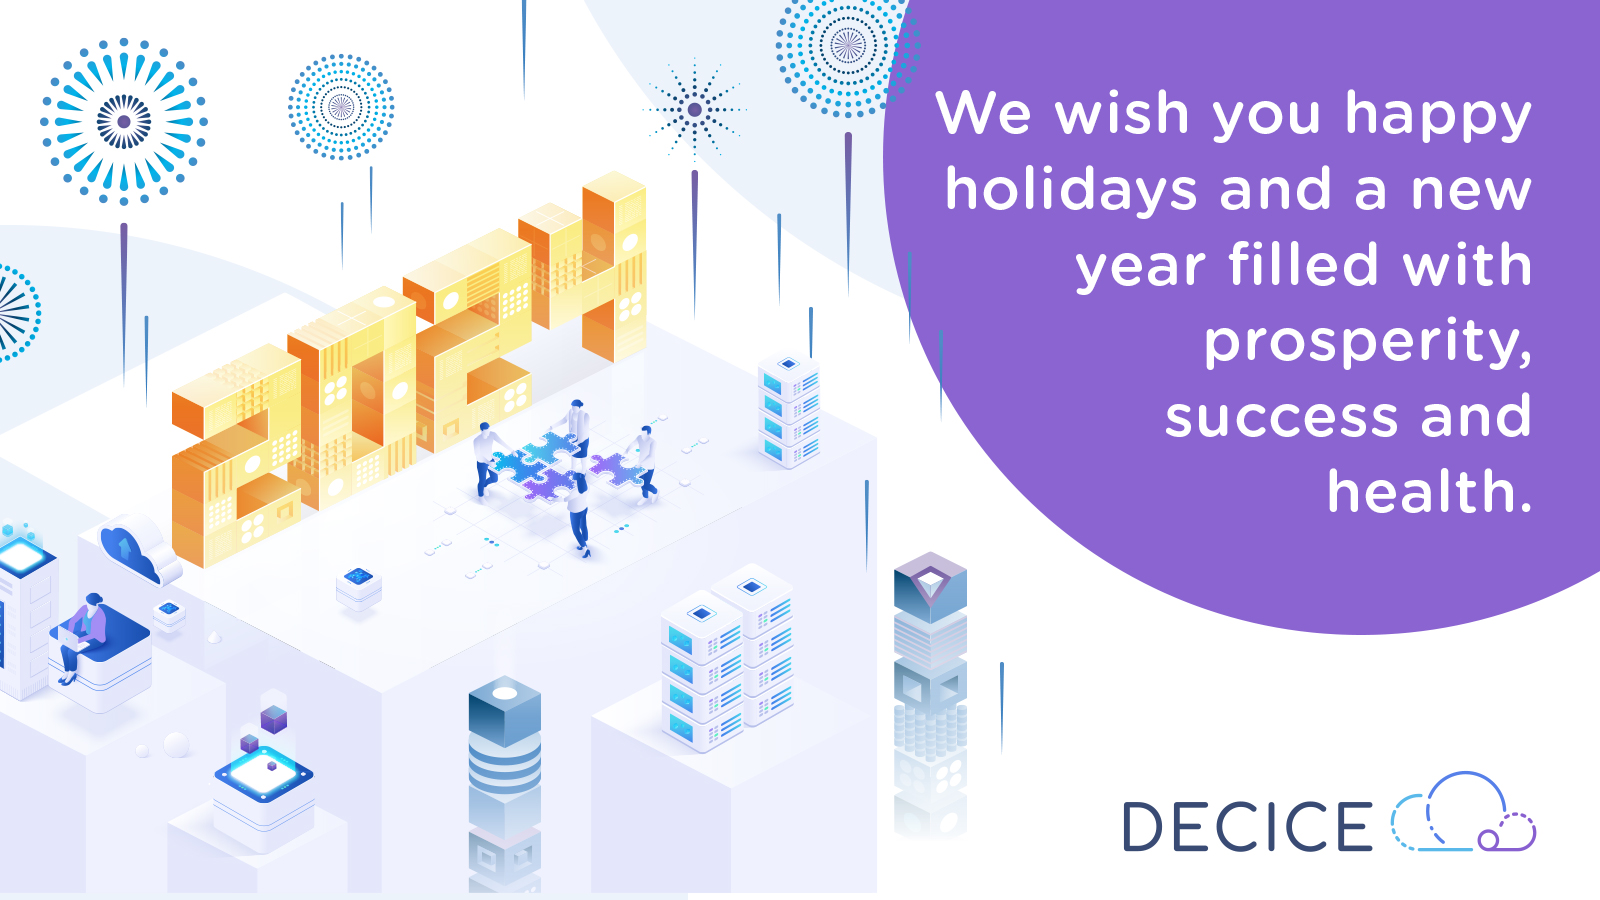 DECICE wishes you happy holidays and a new year filled with prosperity, success and health. DECICE Logo and visualisation of people working together, server, cloud, AI and a bis golden 2024 in the middle.